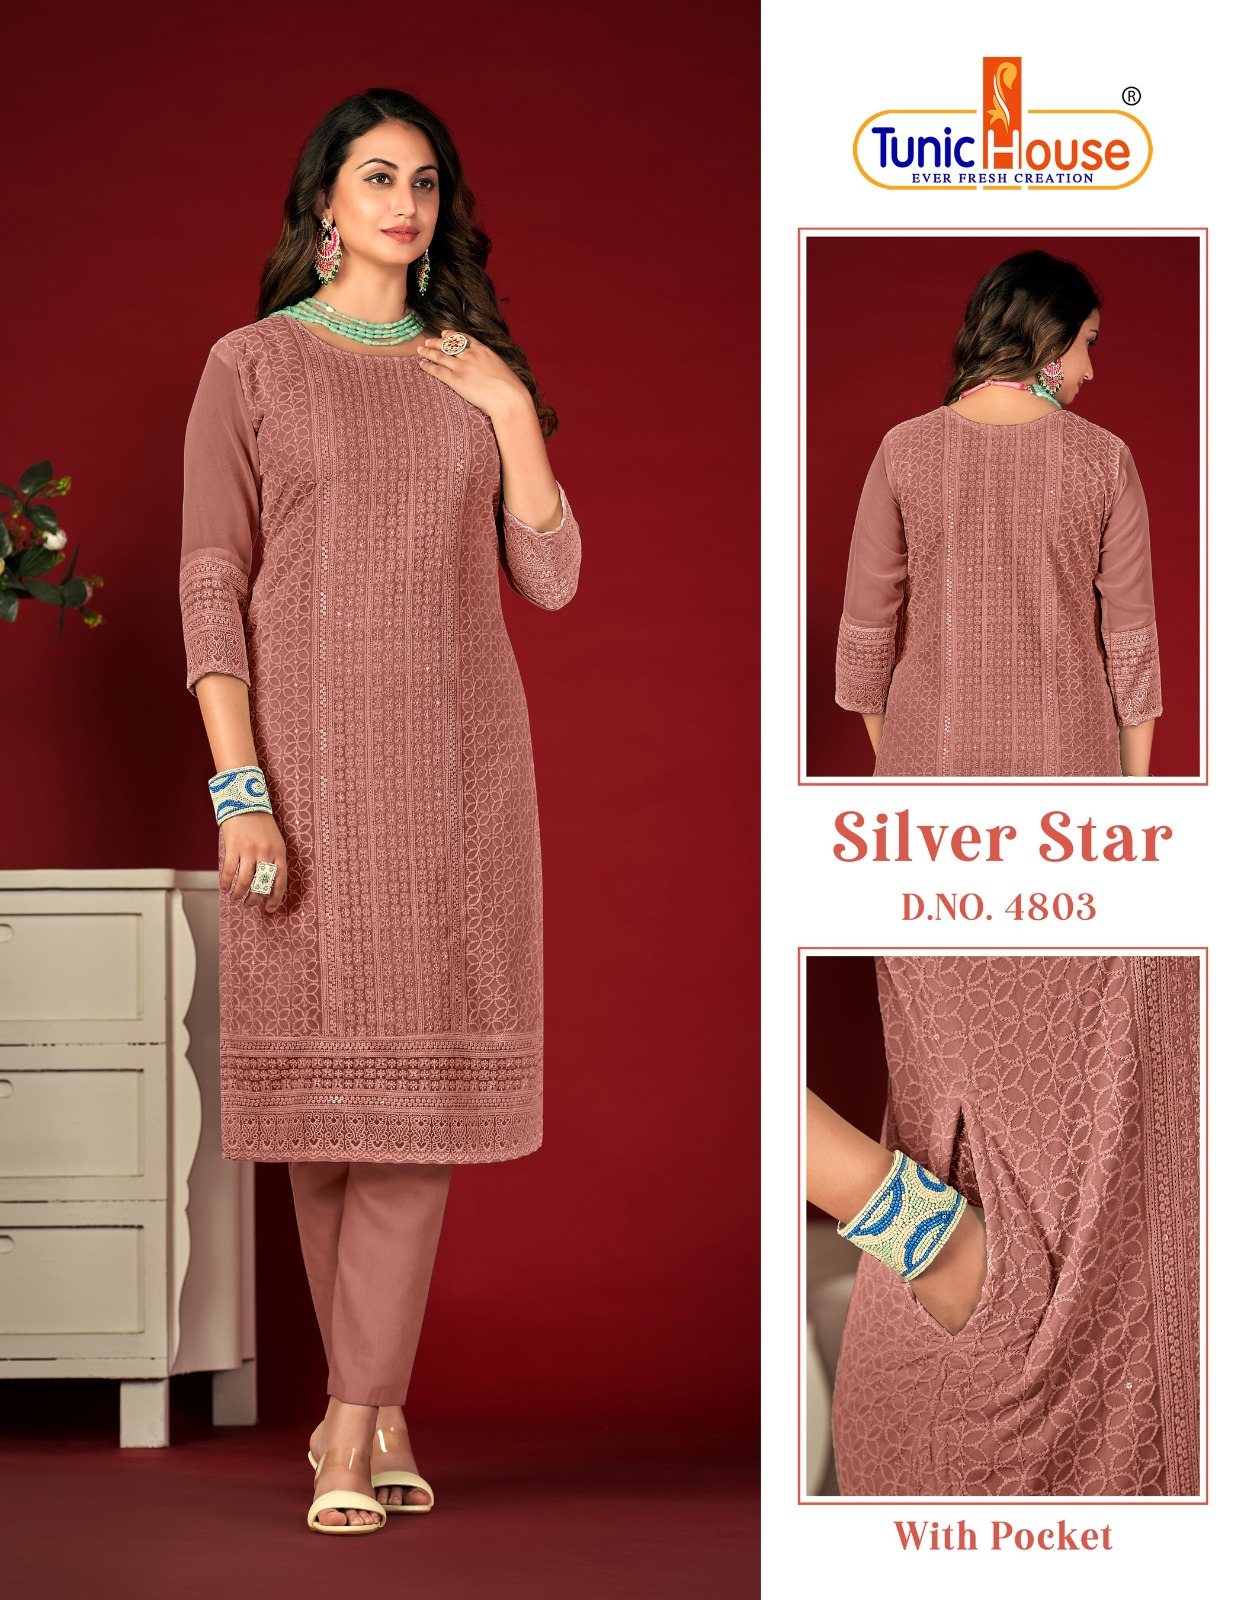 Tunic Houes Silver Star collection 8